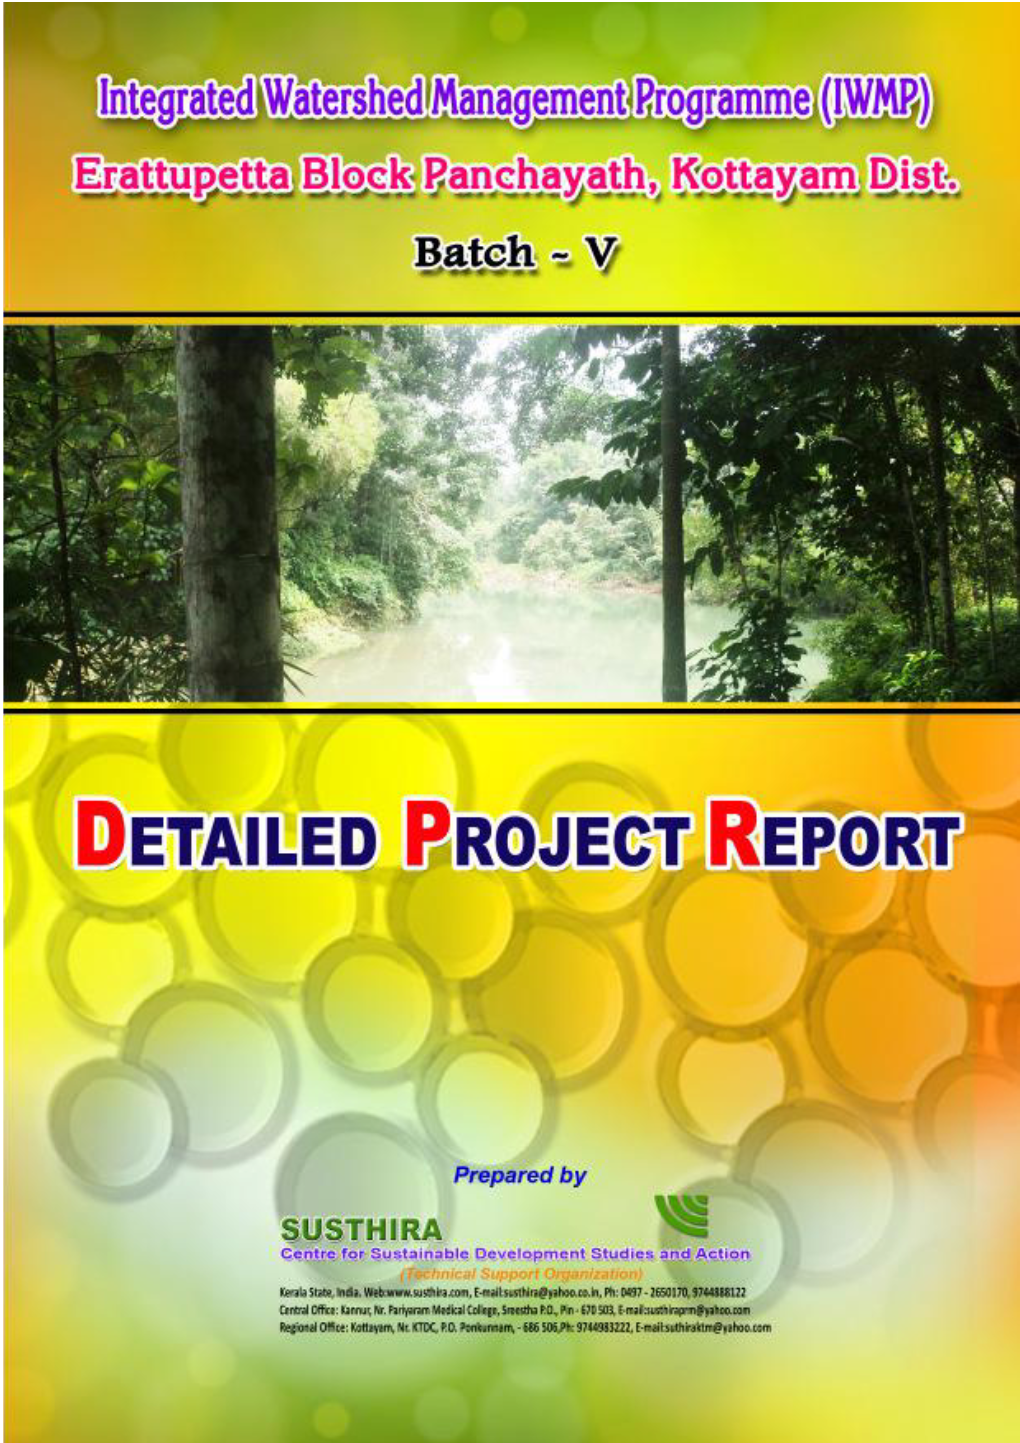 SUSTHIRA [Centre for Sustainable Development Studies and Action] INTEGRATED WATERSHED MANAGEMENT PROGRAMME (V) ERATTUPETTA BLOCK PANCHAYATH Page No.2